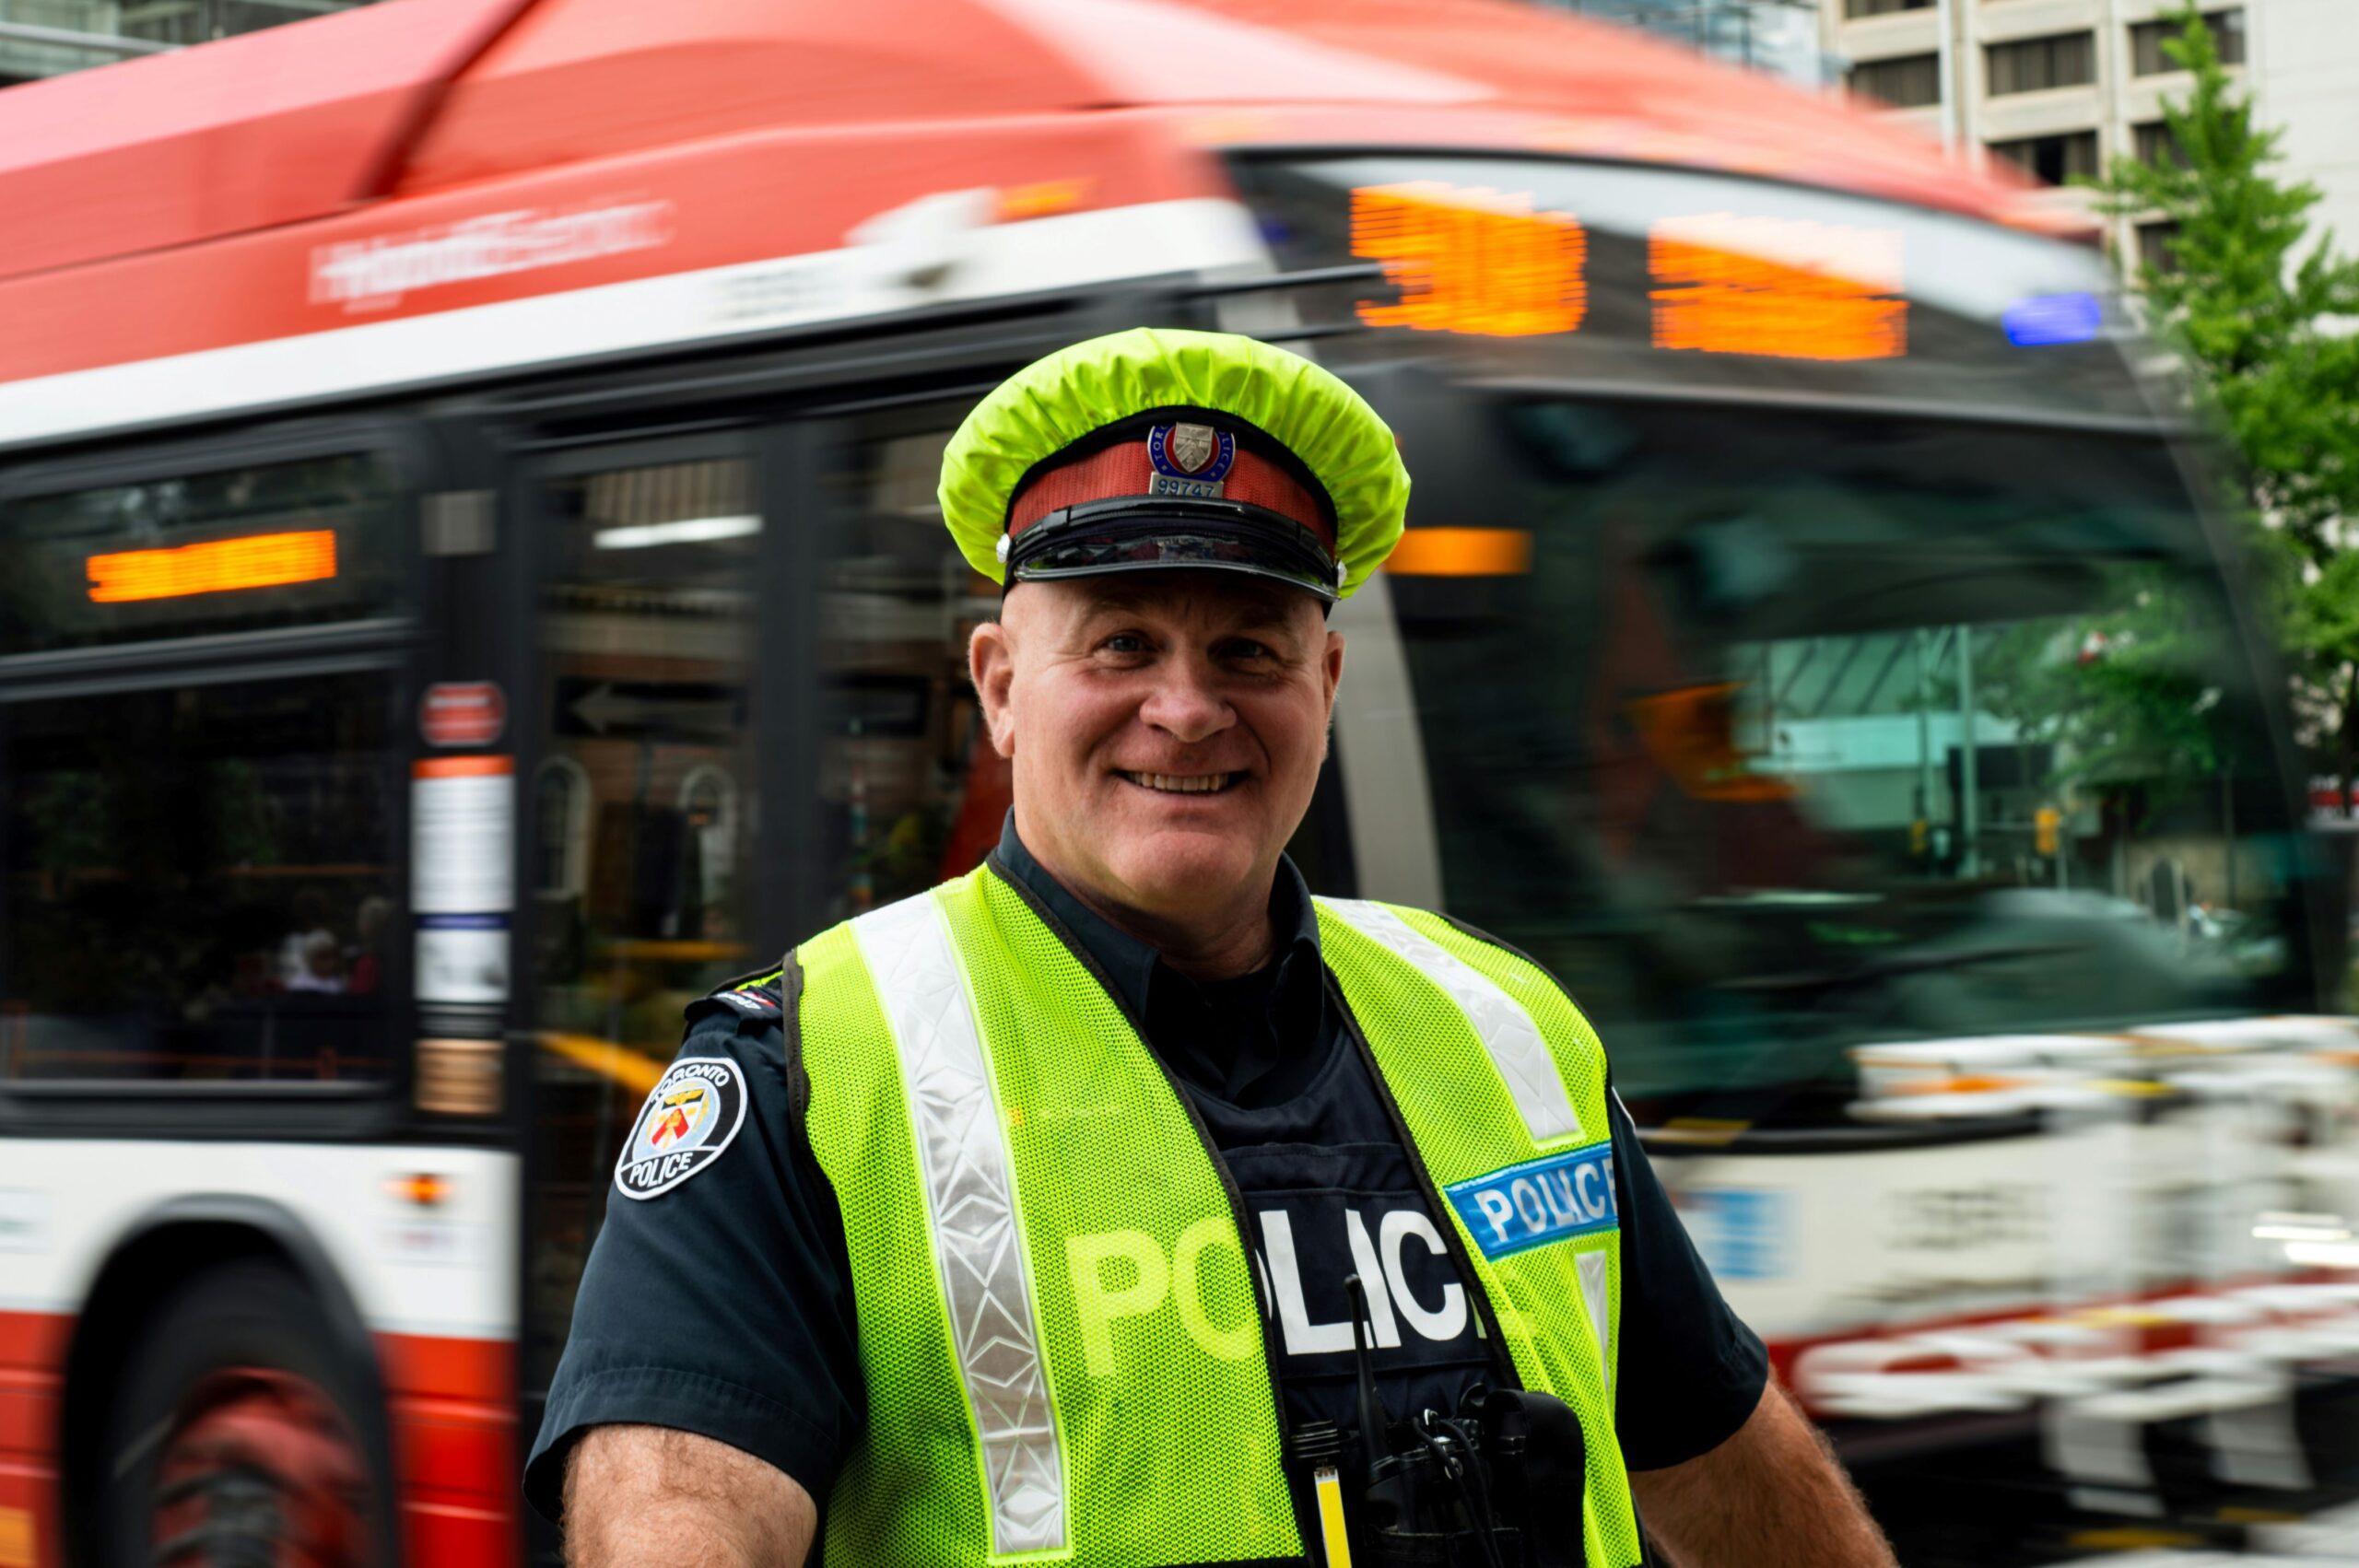 A photo of a police officer in front of a TTC vehicle.